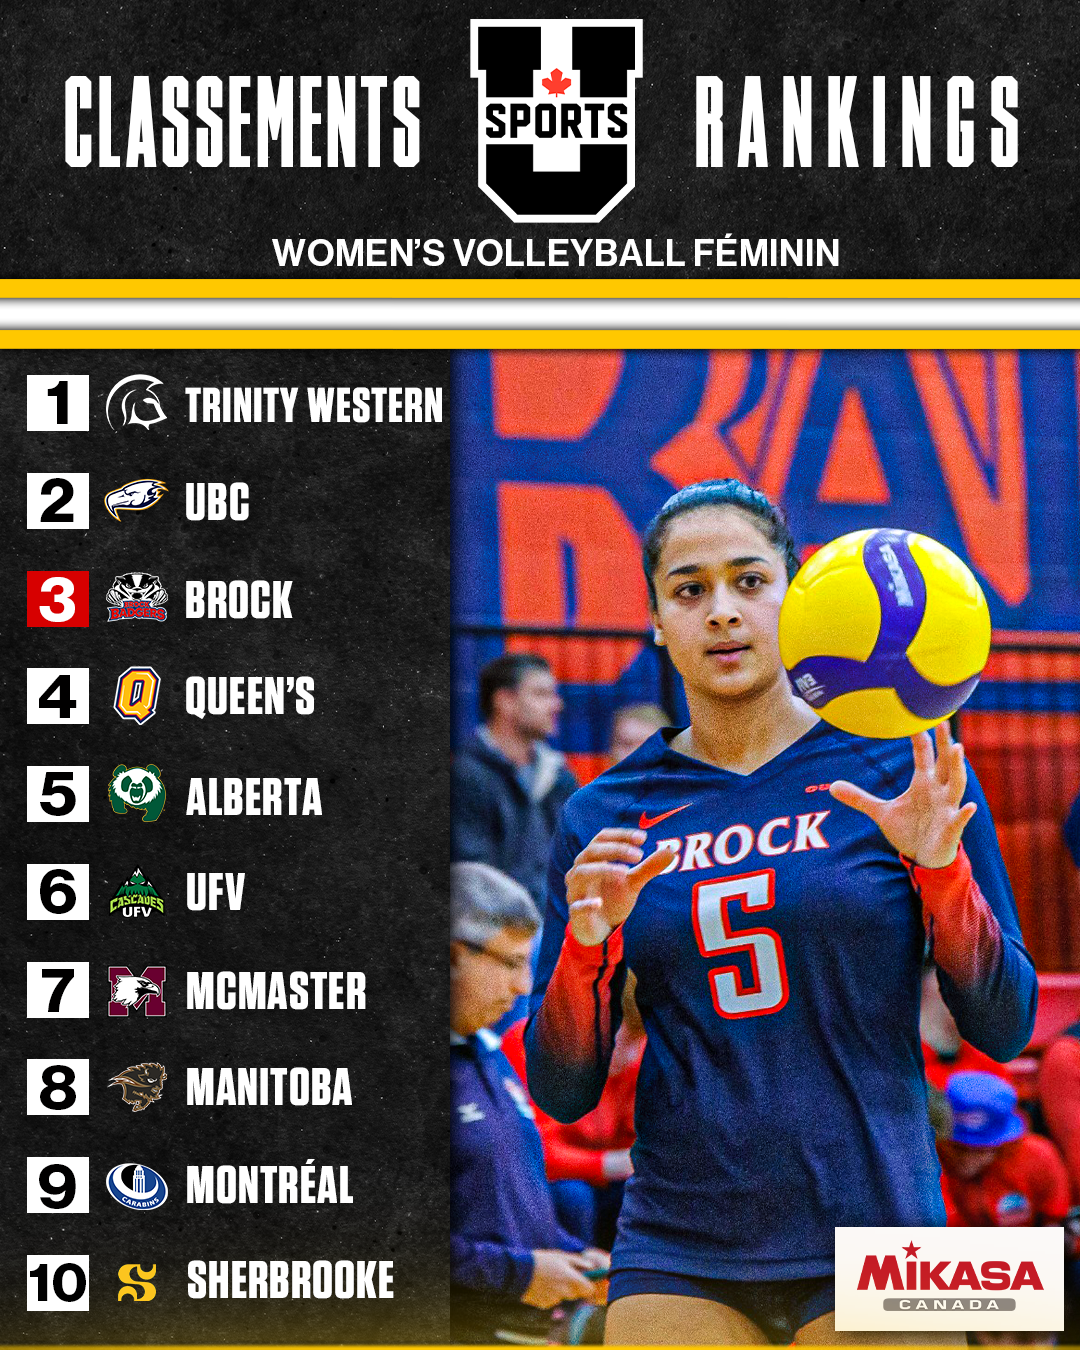 Top_10_WVB.png (2.23 MB)